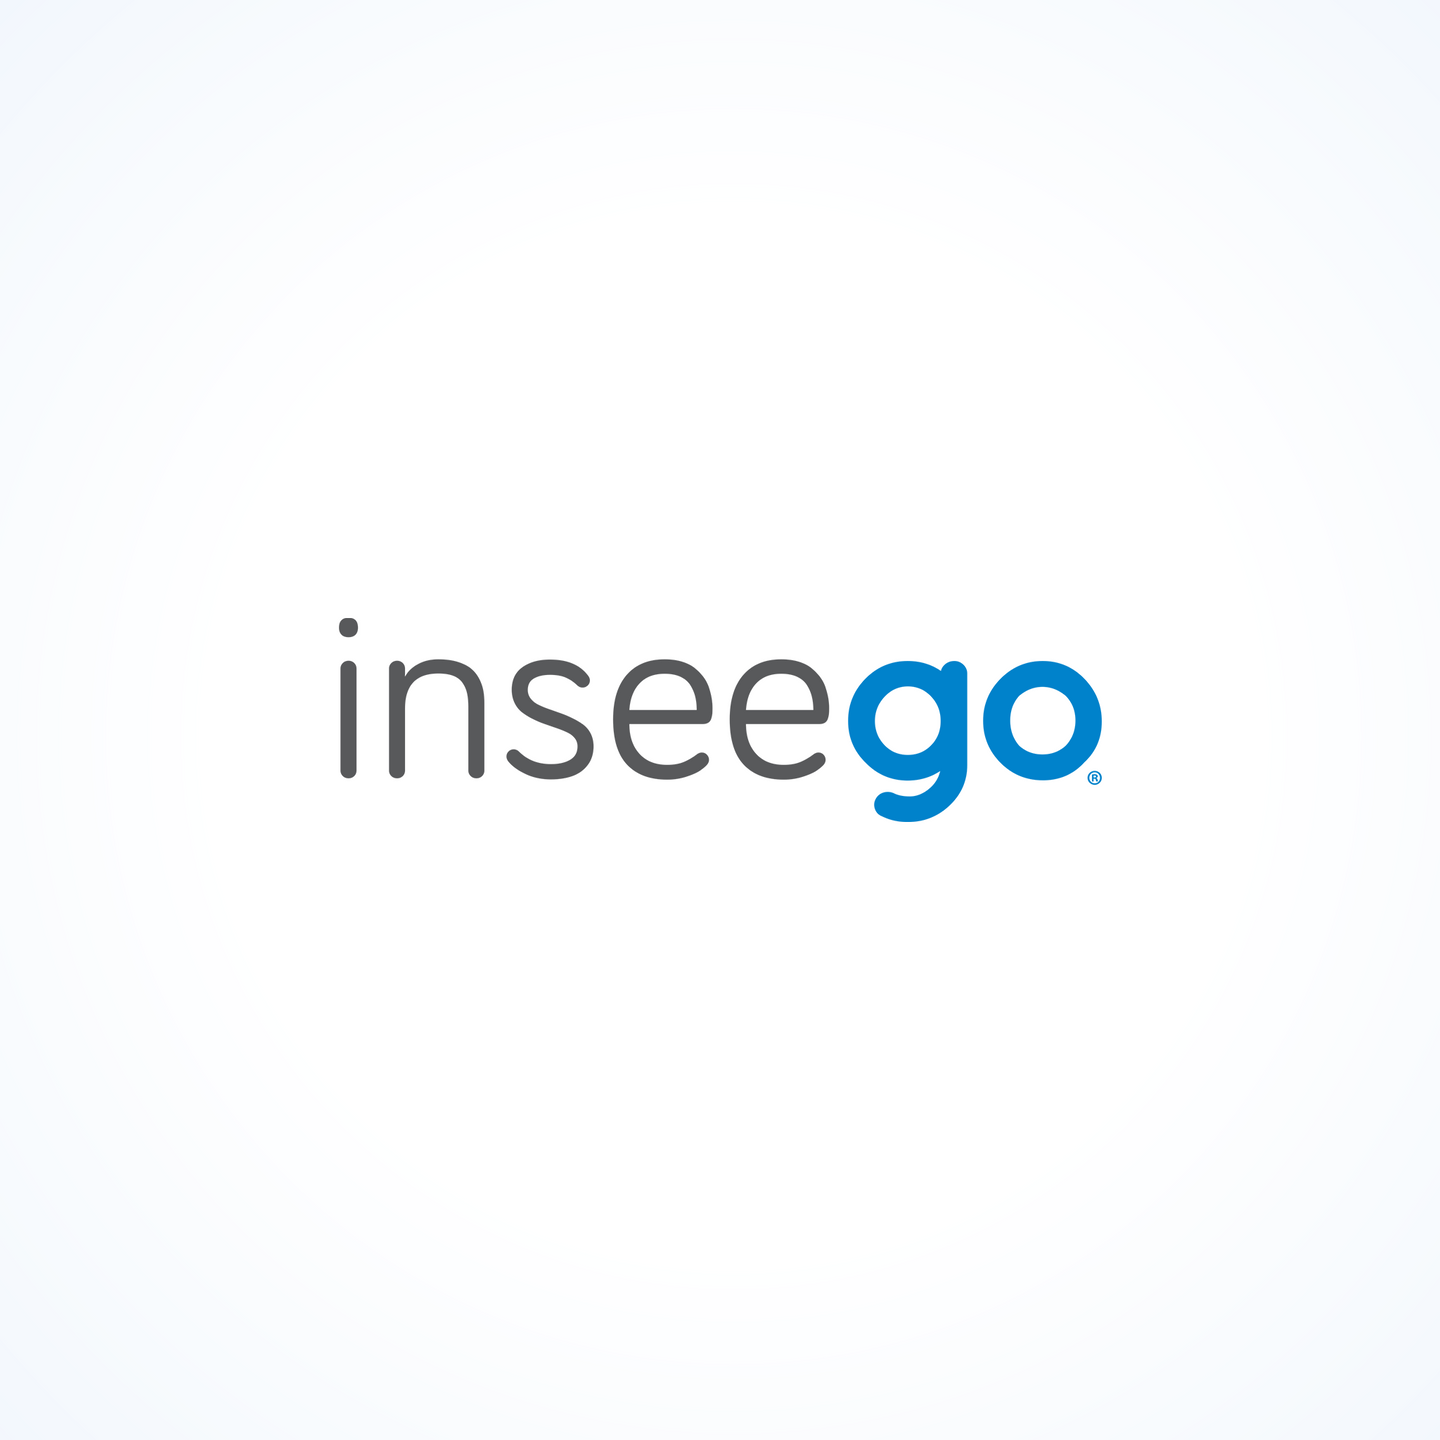 Three-year extended warranty service for the Inseego S2000e device.